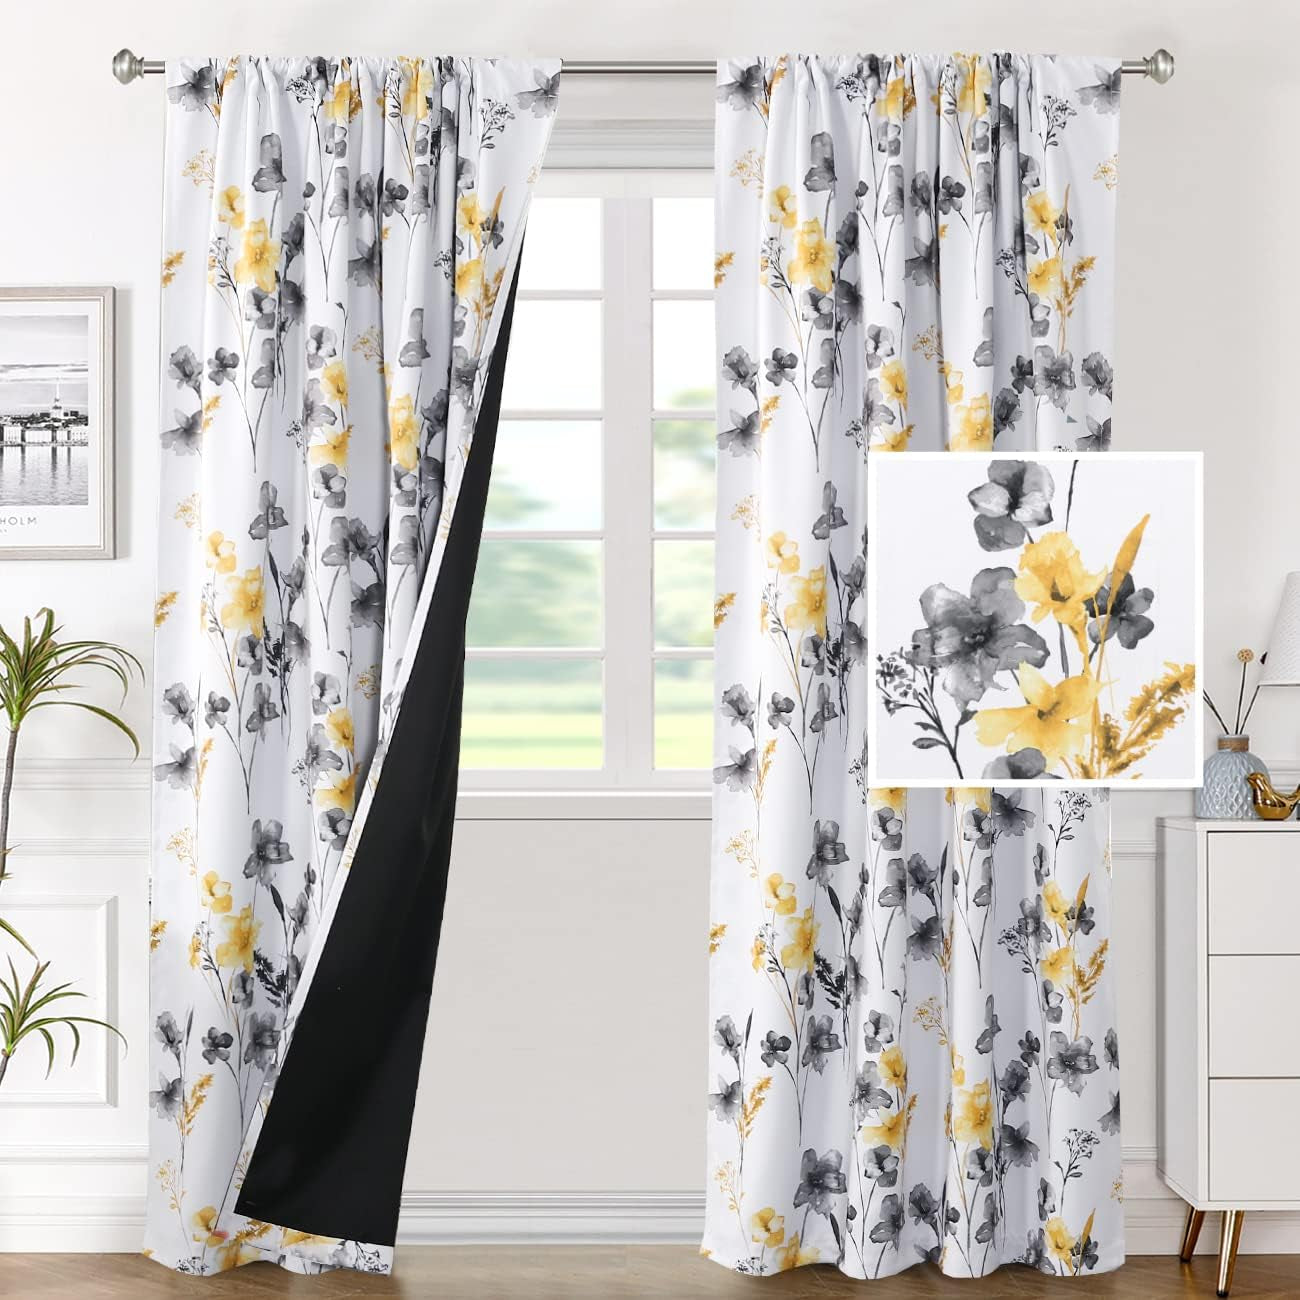 H.VERSAILTEX 100% Blackout Curtains for Bedroom Cattleya Floral Printed Drapes 84 Inches Long Leah Floral Pattern Full Light Blocking Drapes with Black Liner Rod Pocket 2 Panels, Navy/Taupe  H.VERSAILTEX Grey/Yellow 52"W X 84"L 